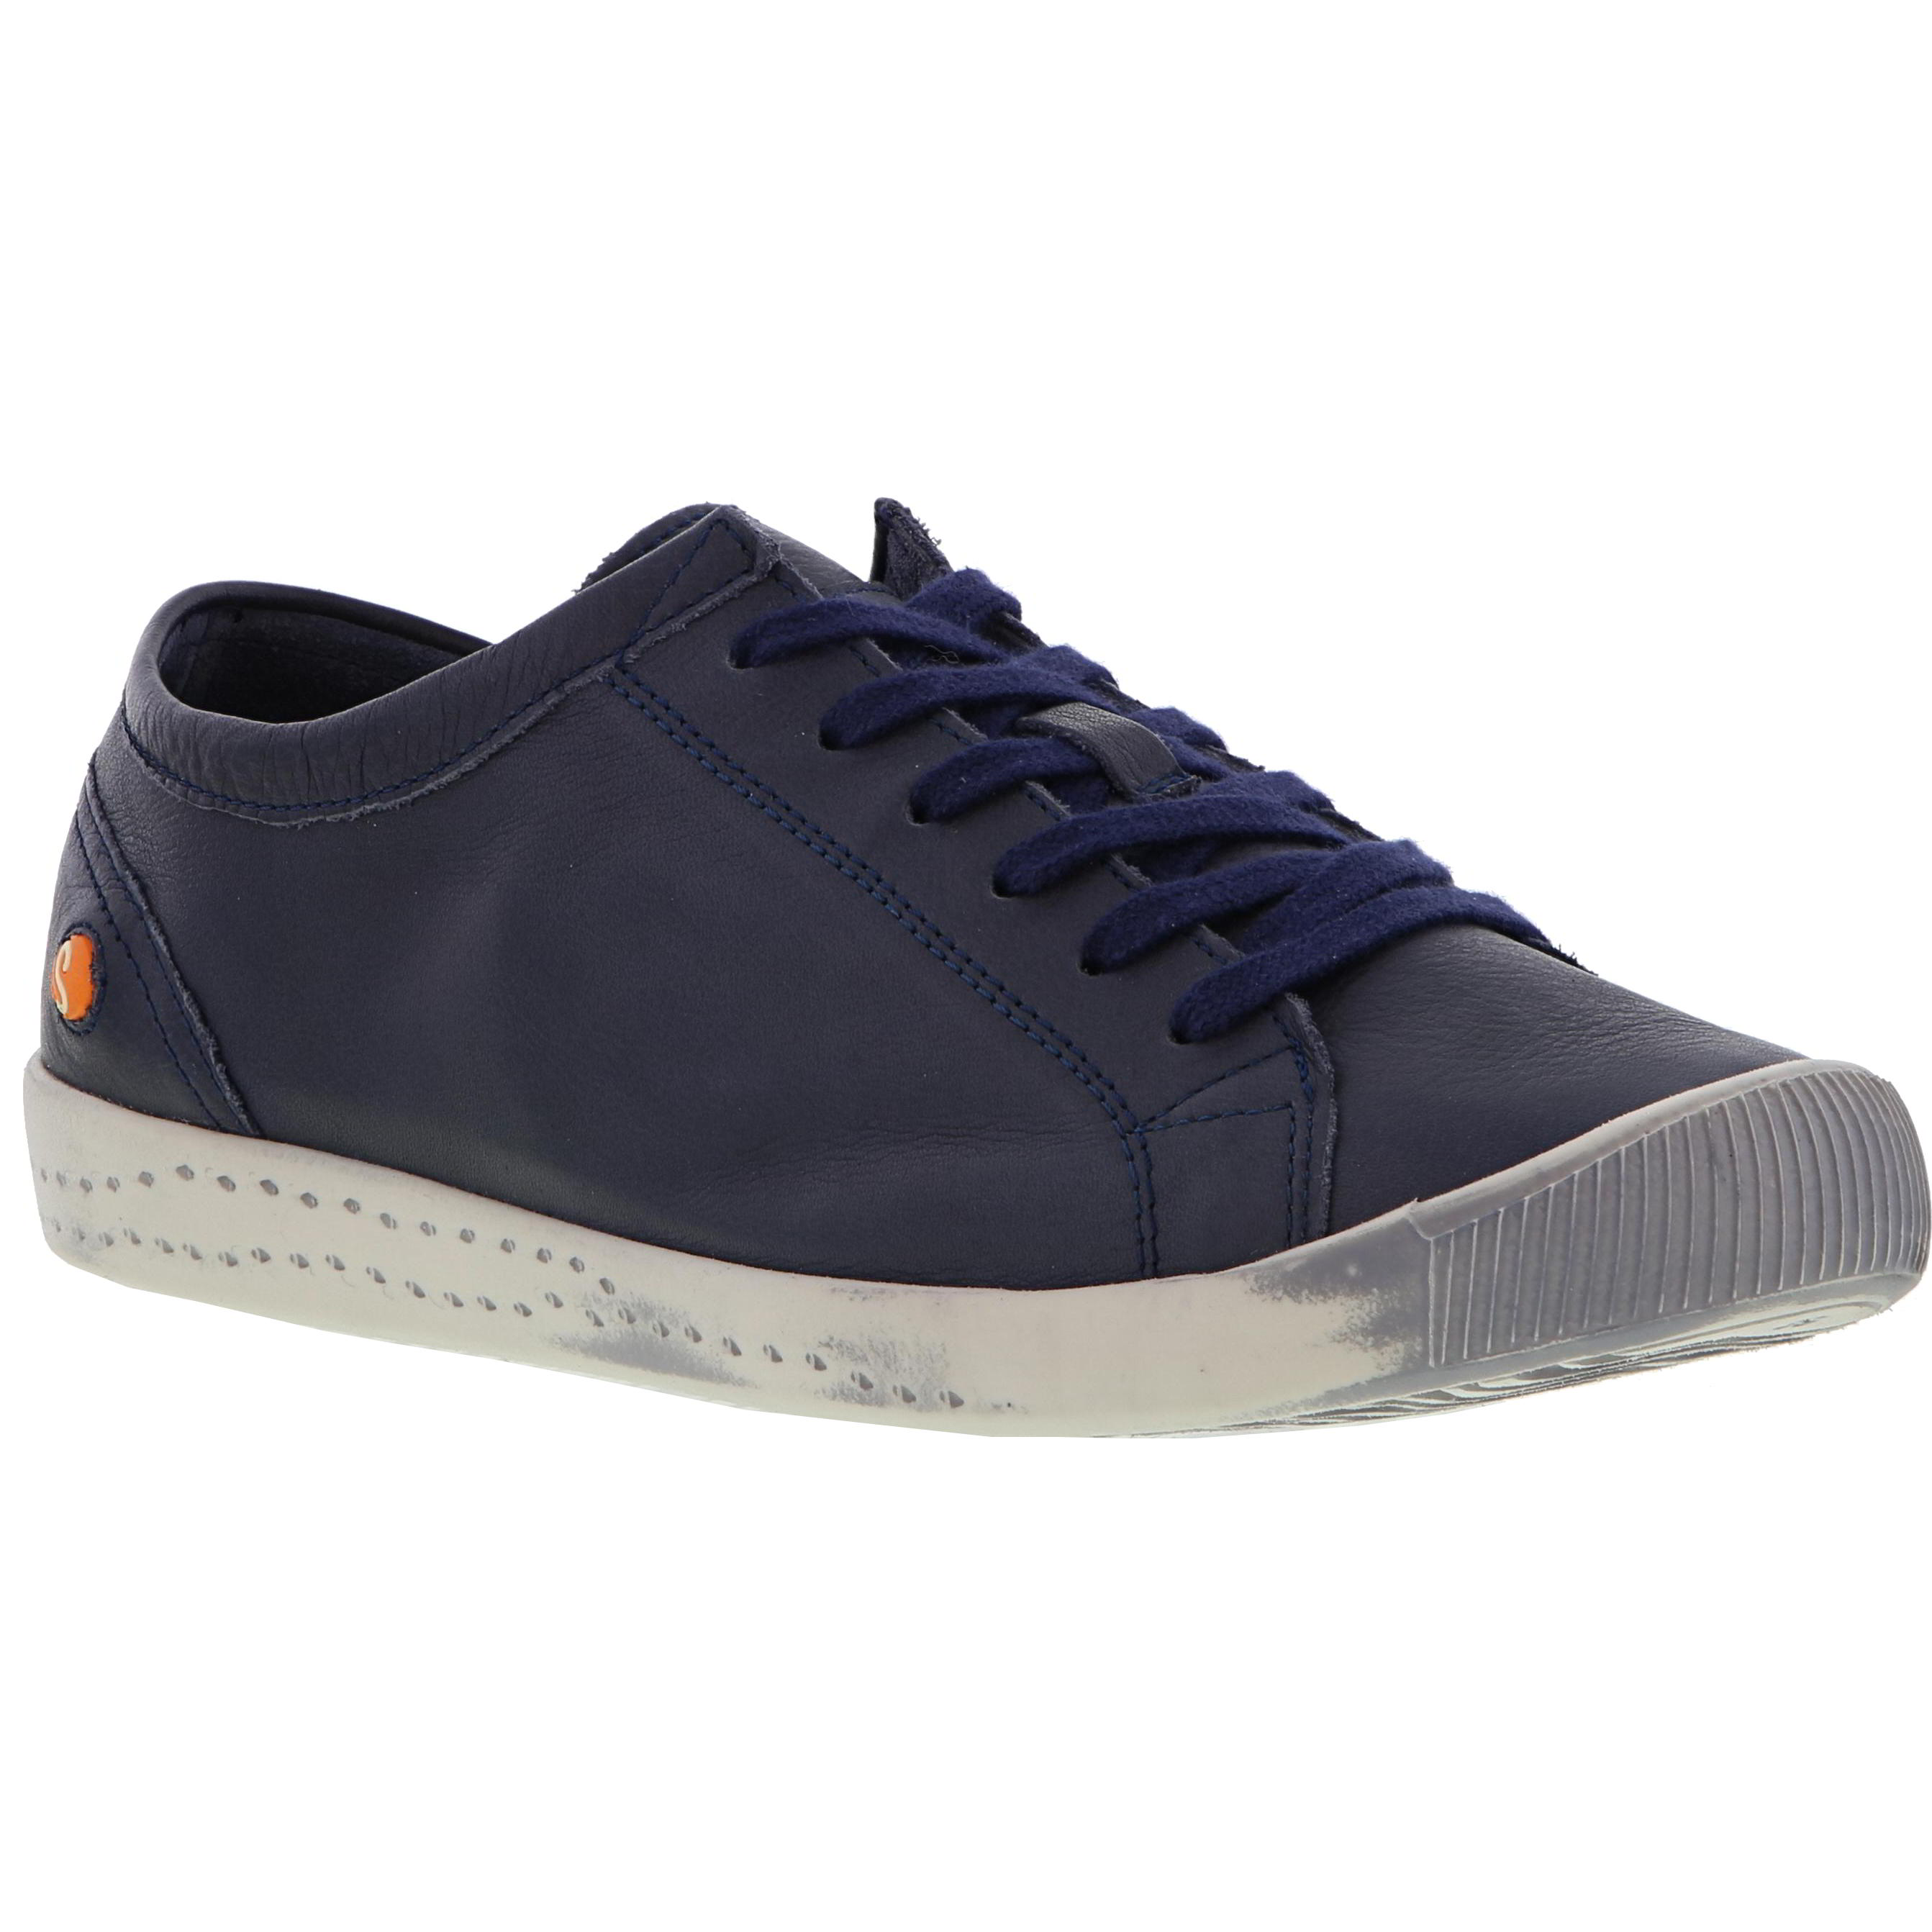 Softinos by Fly London Women's Isla Leather Trainers Shoes - Navy Smooth - UK 5 / EU 38